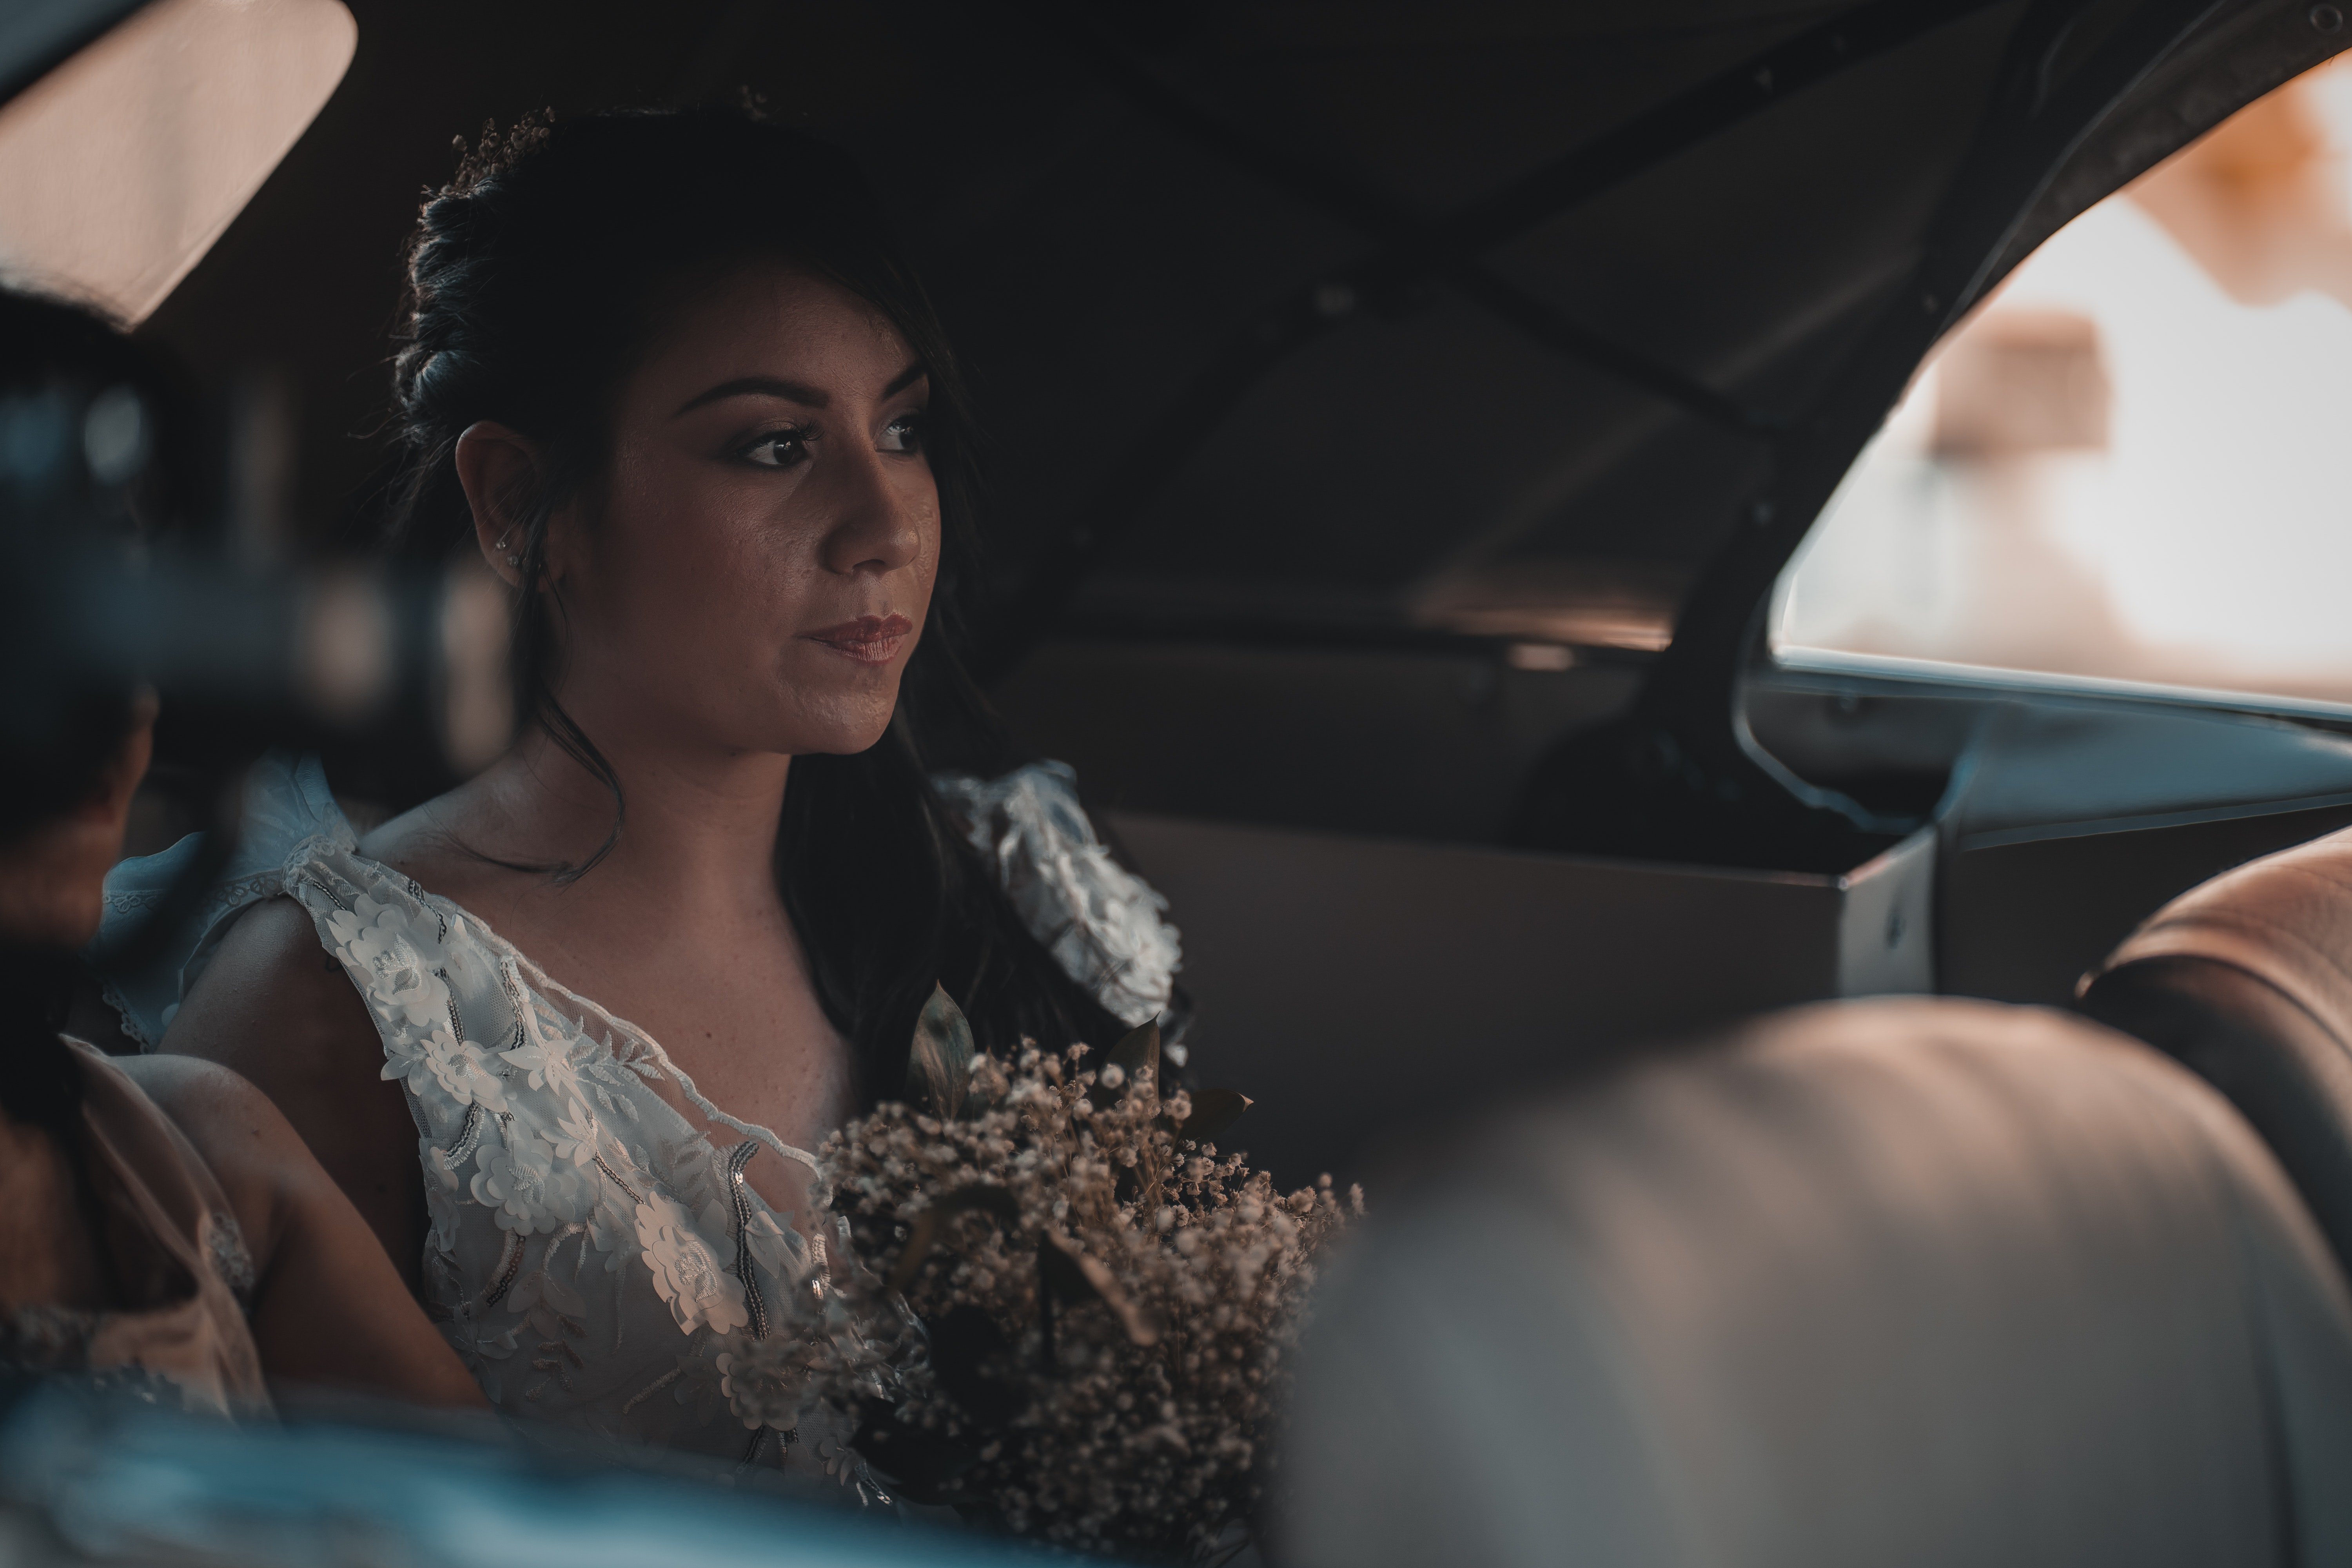 A bride sitting in a car backseat | Source: Pexels